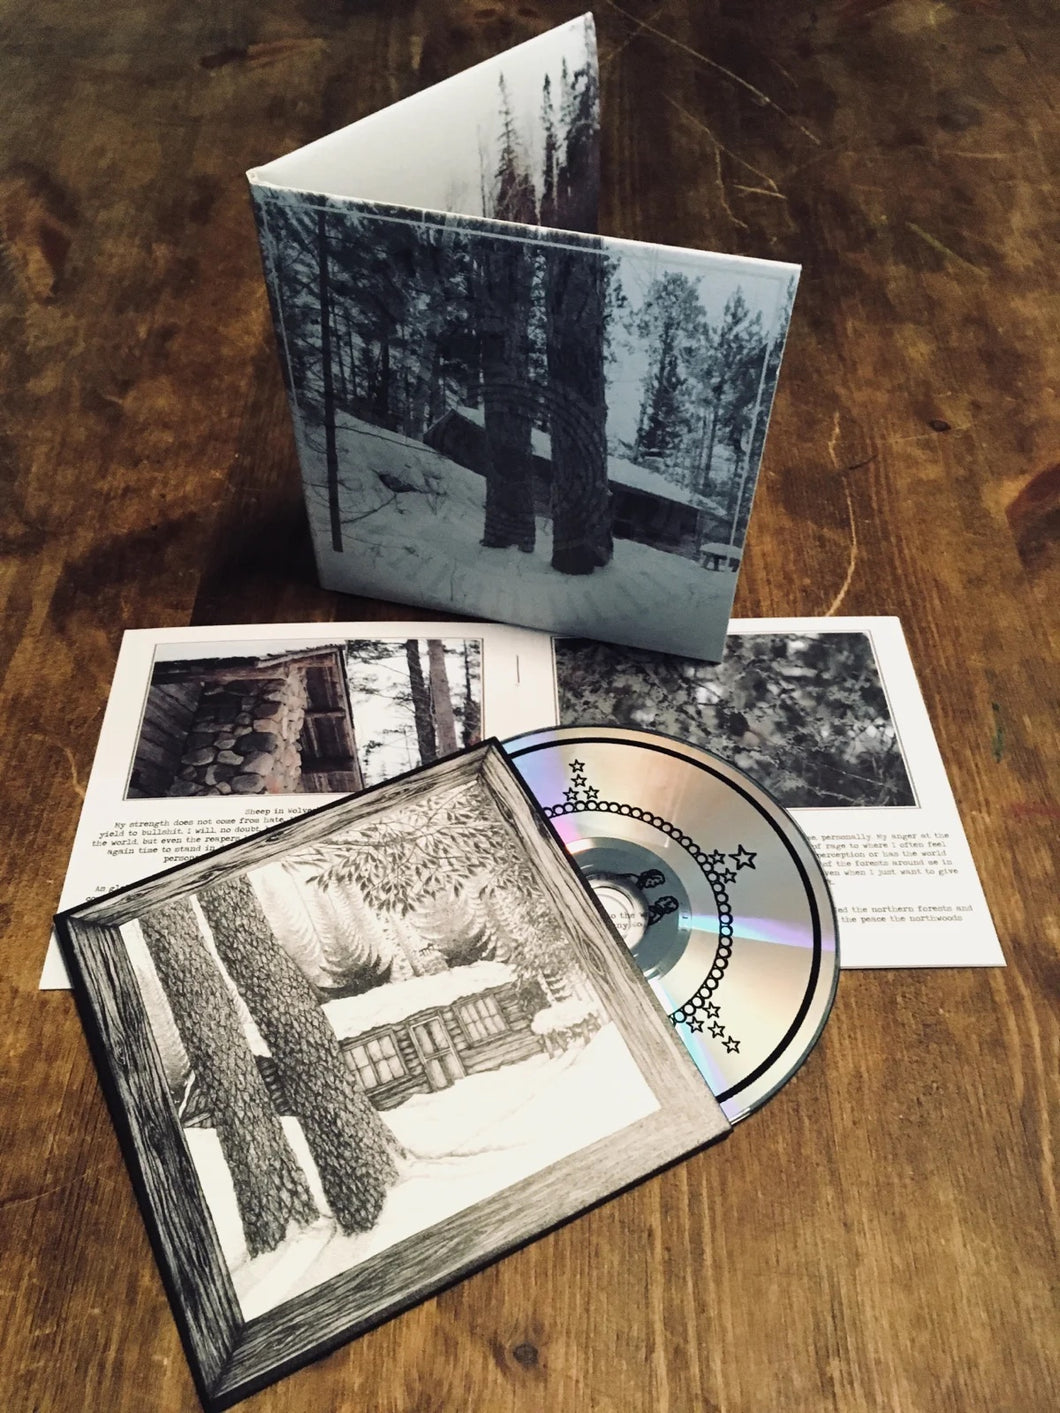 The Scars of Man on the Once Nameless Wilderness Part 1 CD